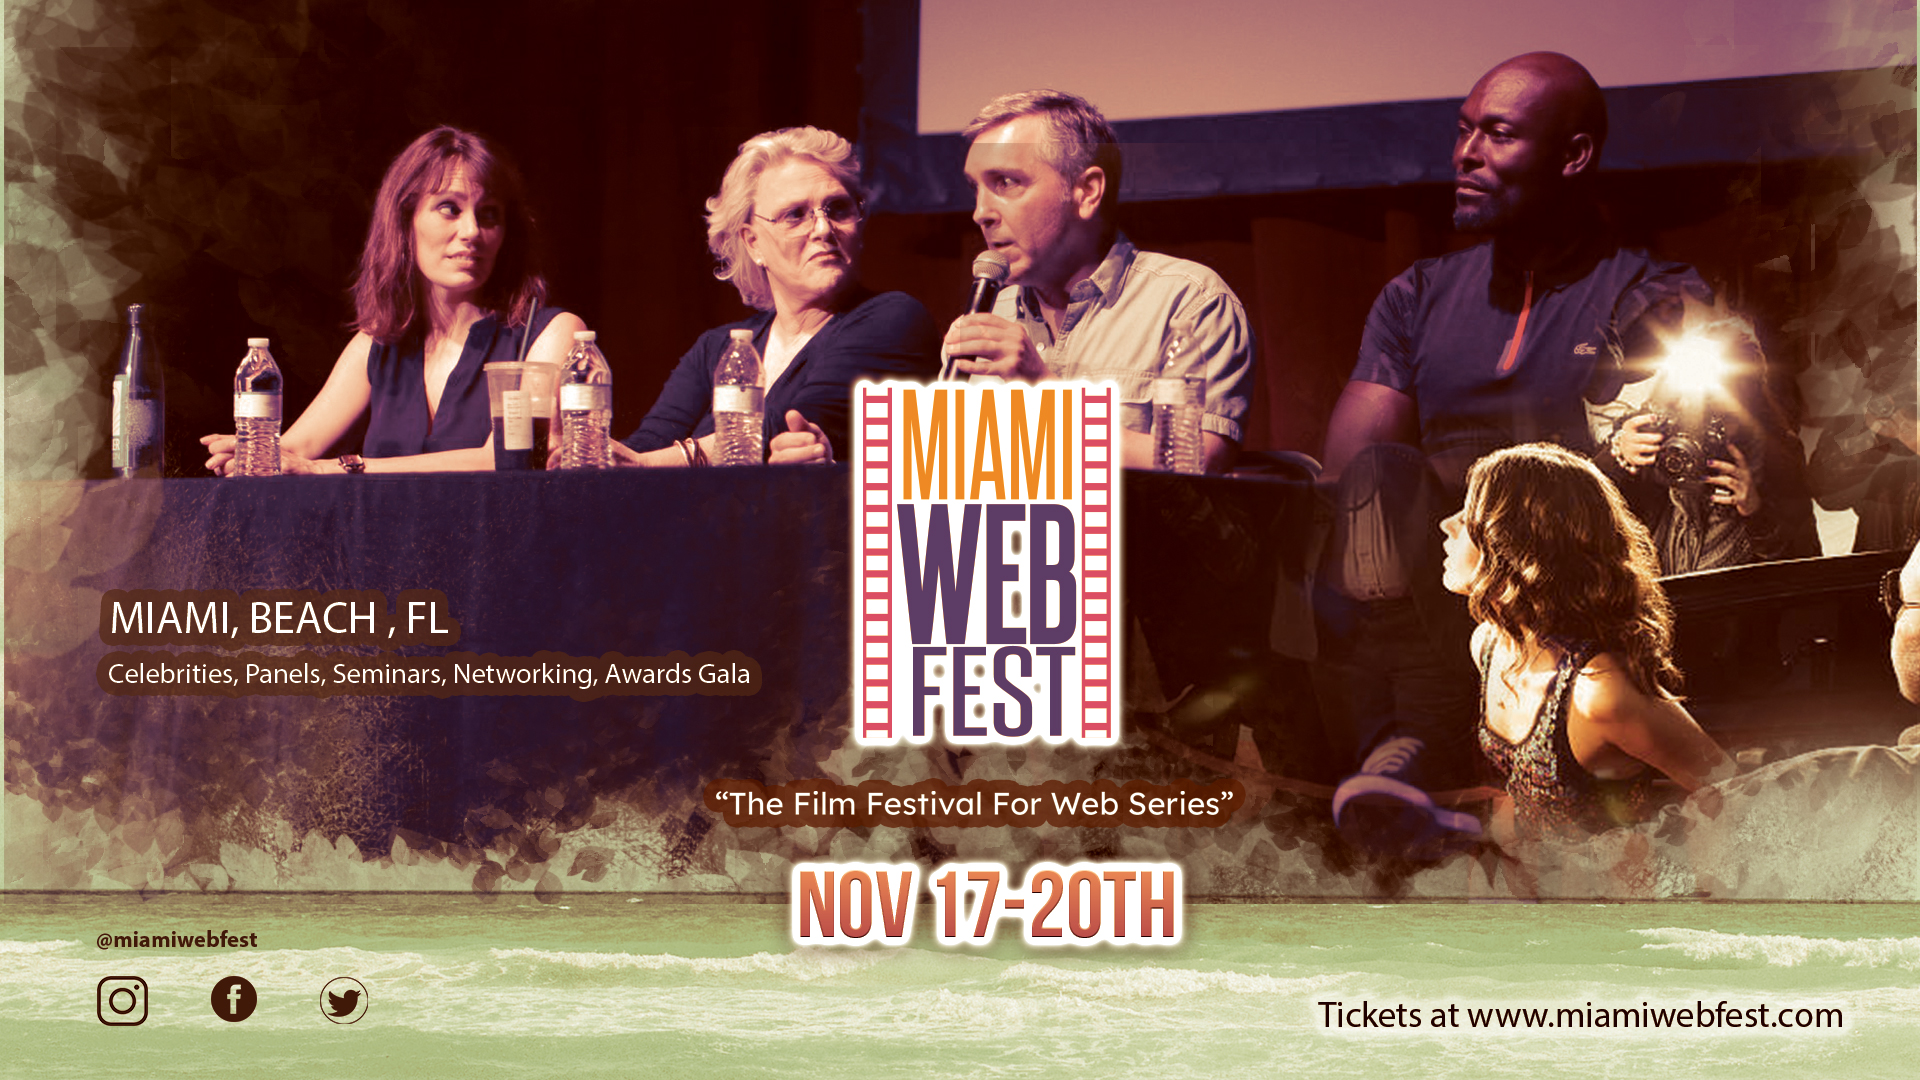 Miami Web Fest Refreshes the Festival Scene, Nov. 17-20, with Its Film-Business-Show Focus